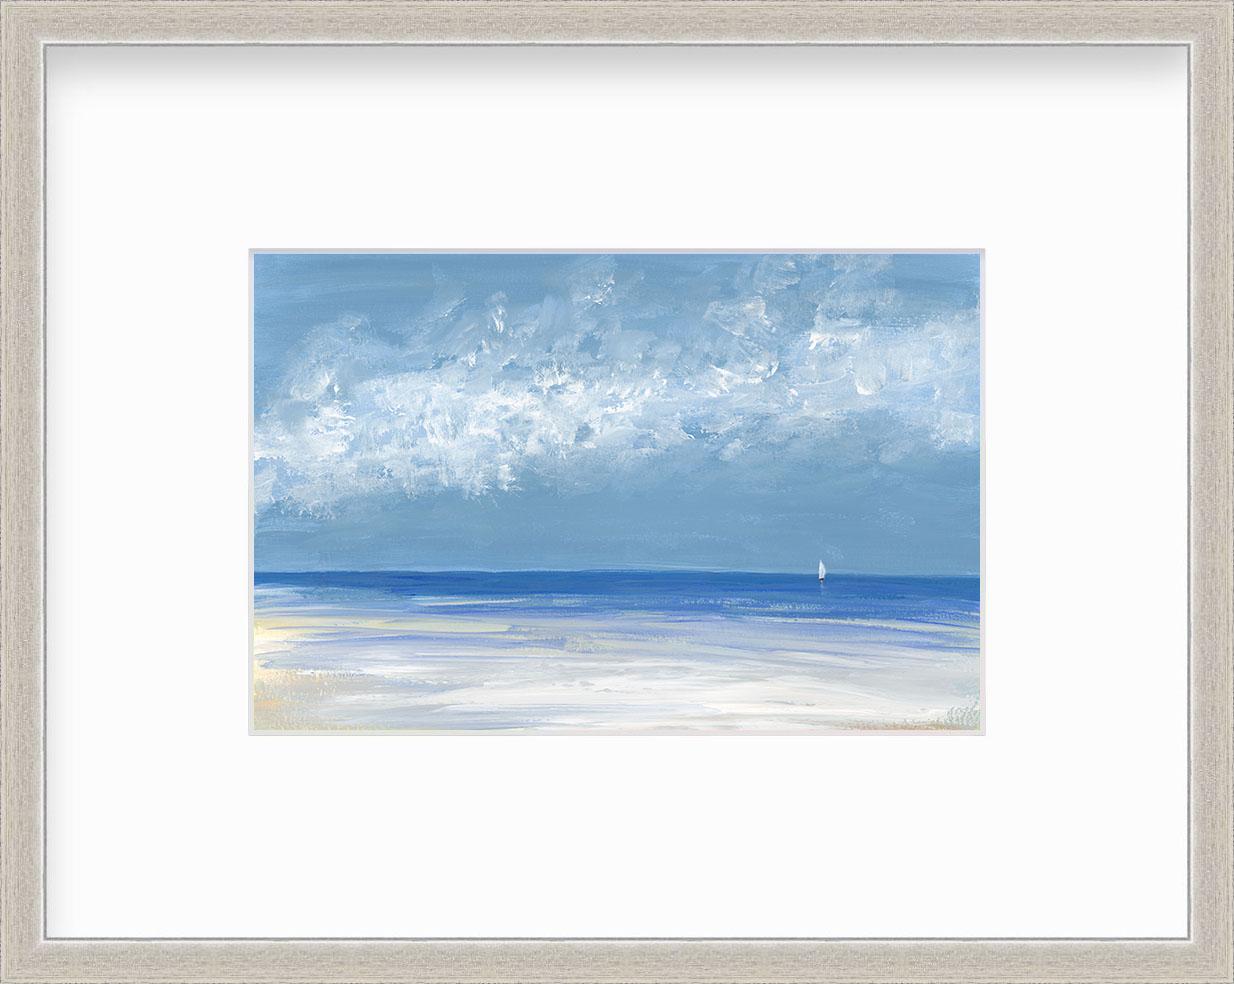 S. Cora Aldo Landscape Print - "Clear Day, " Framed Limited Edition Giclee Print, 10" x 15"